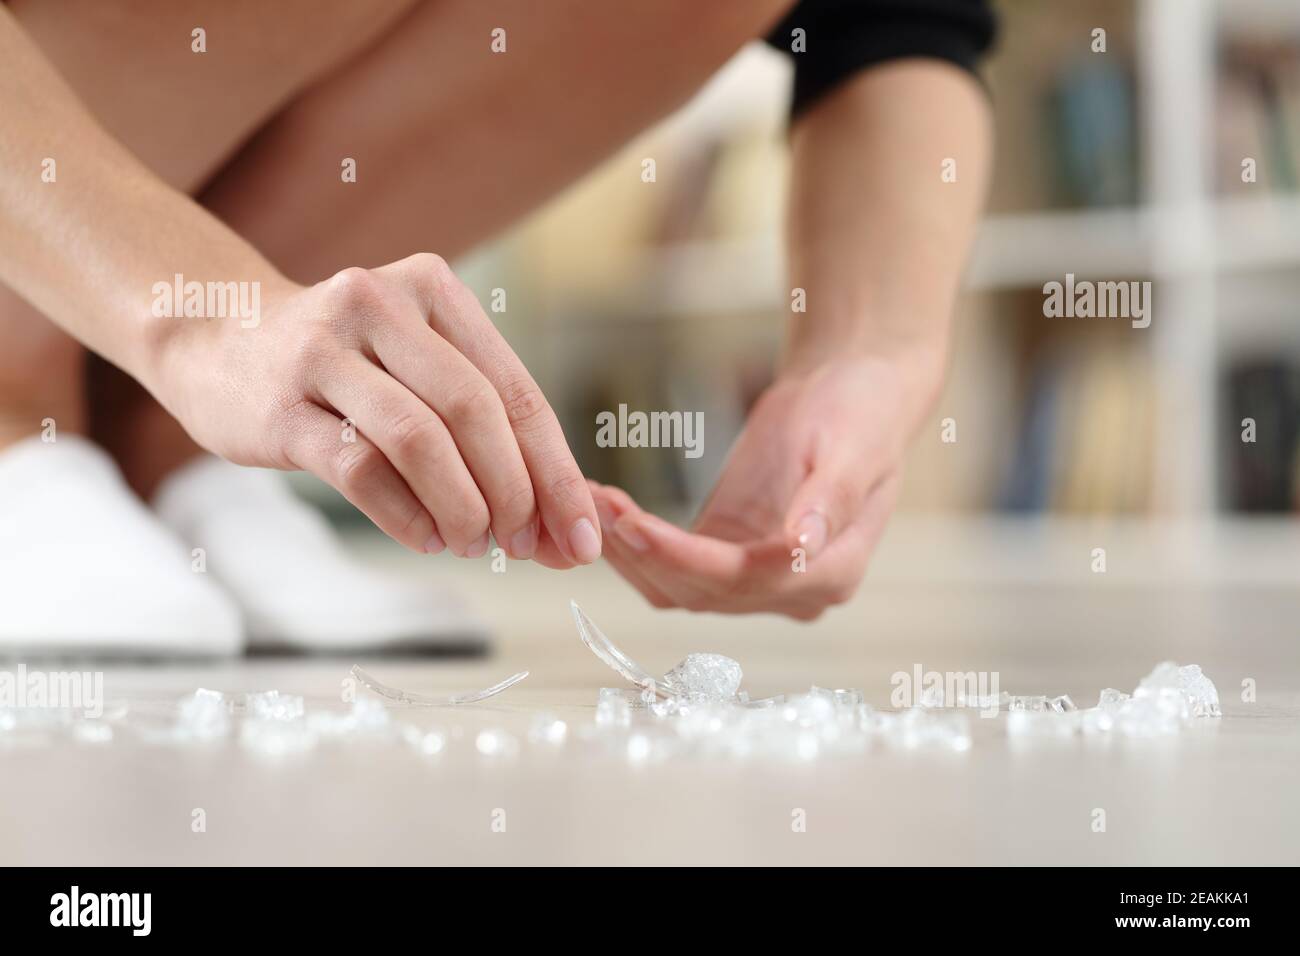 Woman hands picking up broken glass on the floor at home Stock Photo